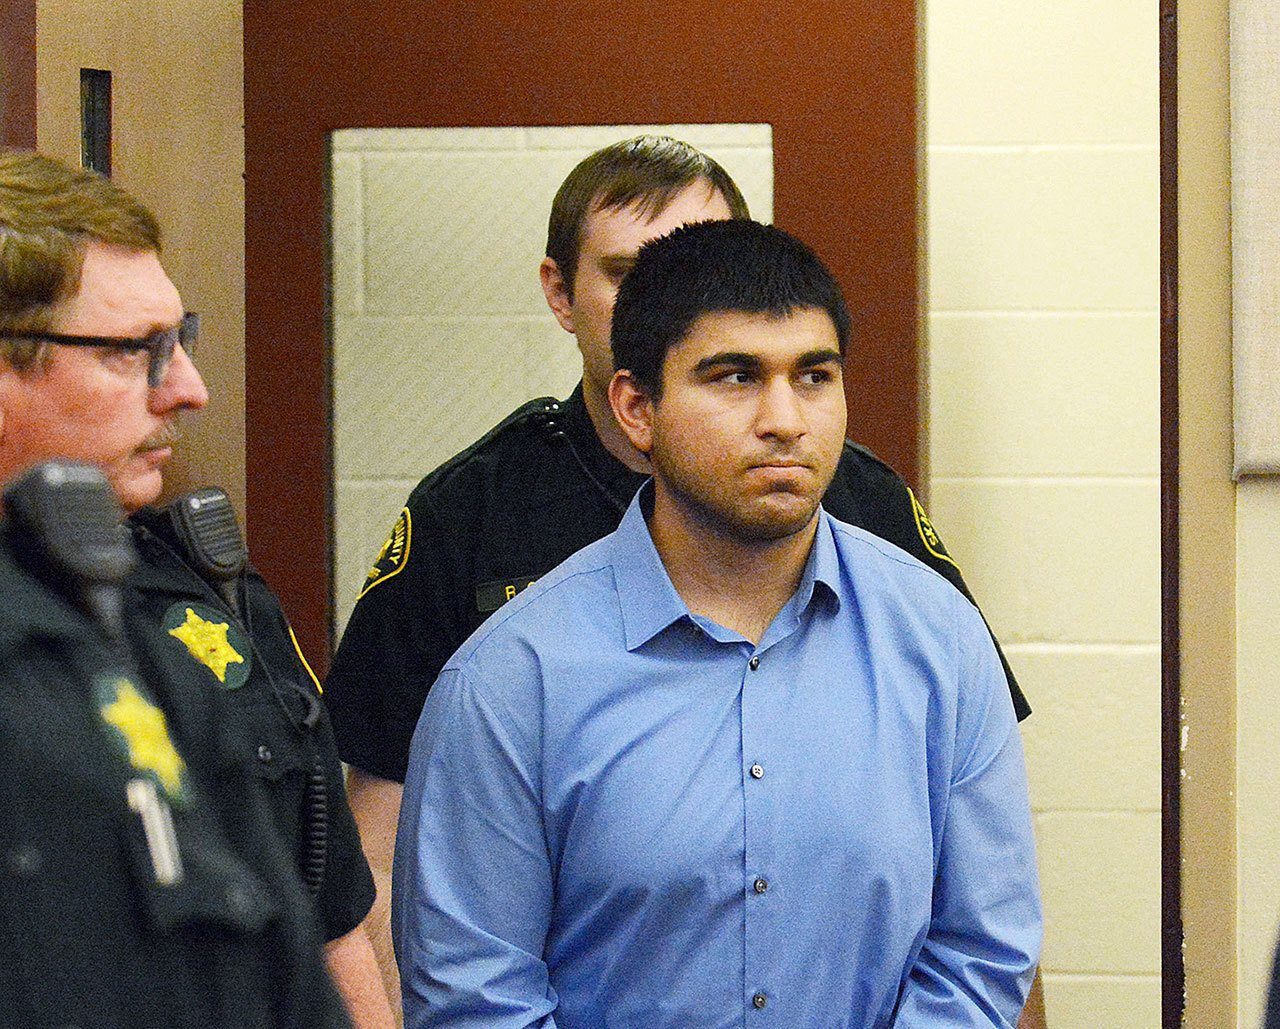 Arcan Cetin is escorted into Skagit County District Court on Monday. (Brandy Shreve/Skagit Valley Herald via AP)